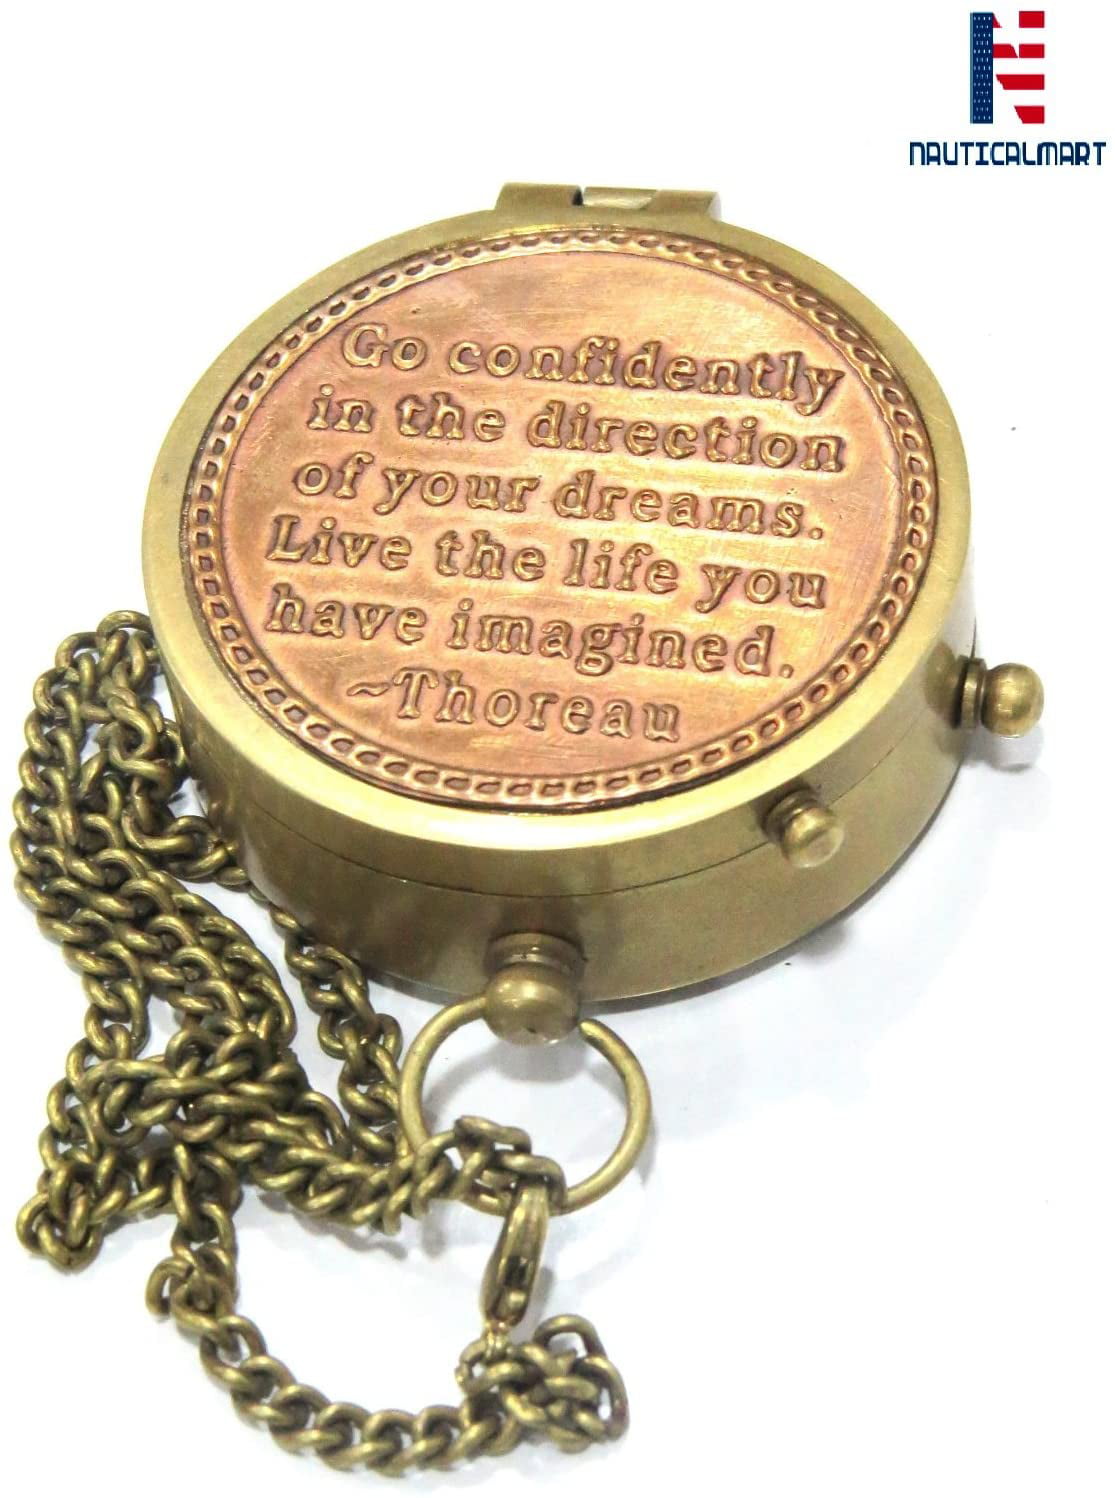 Go Confidently Quote Engraved Brass Compass with Stamped Leather case Thoreau's 